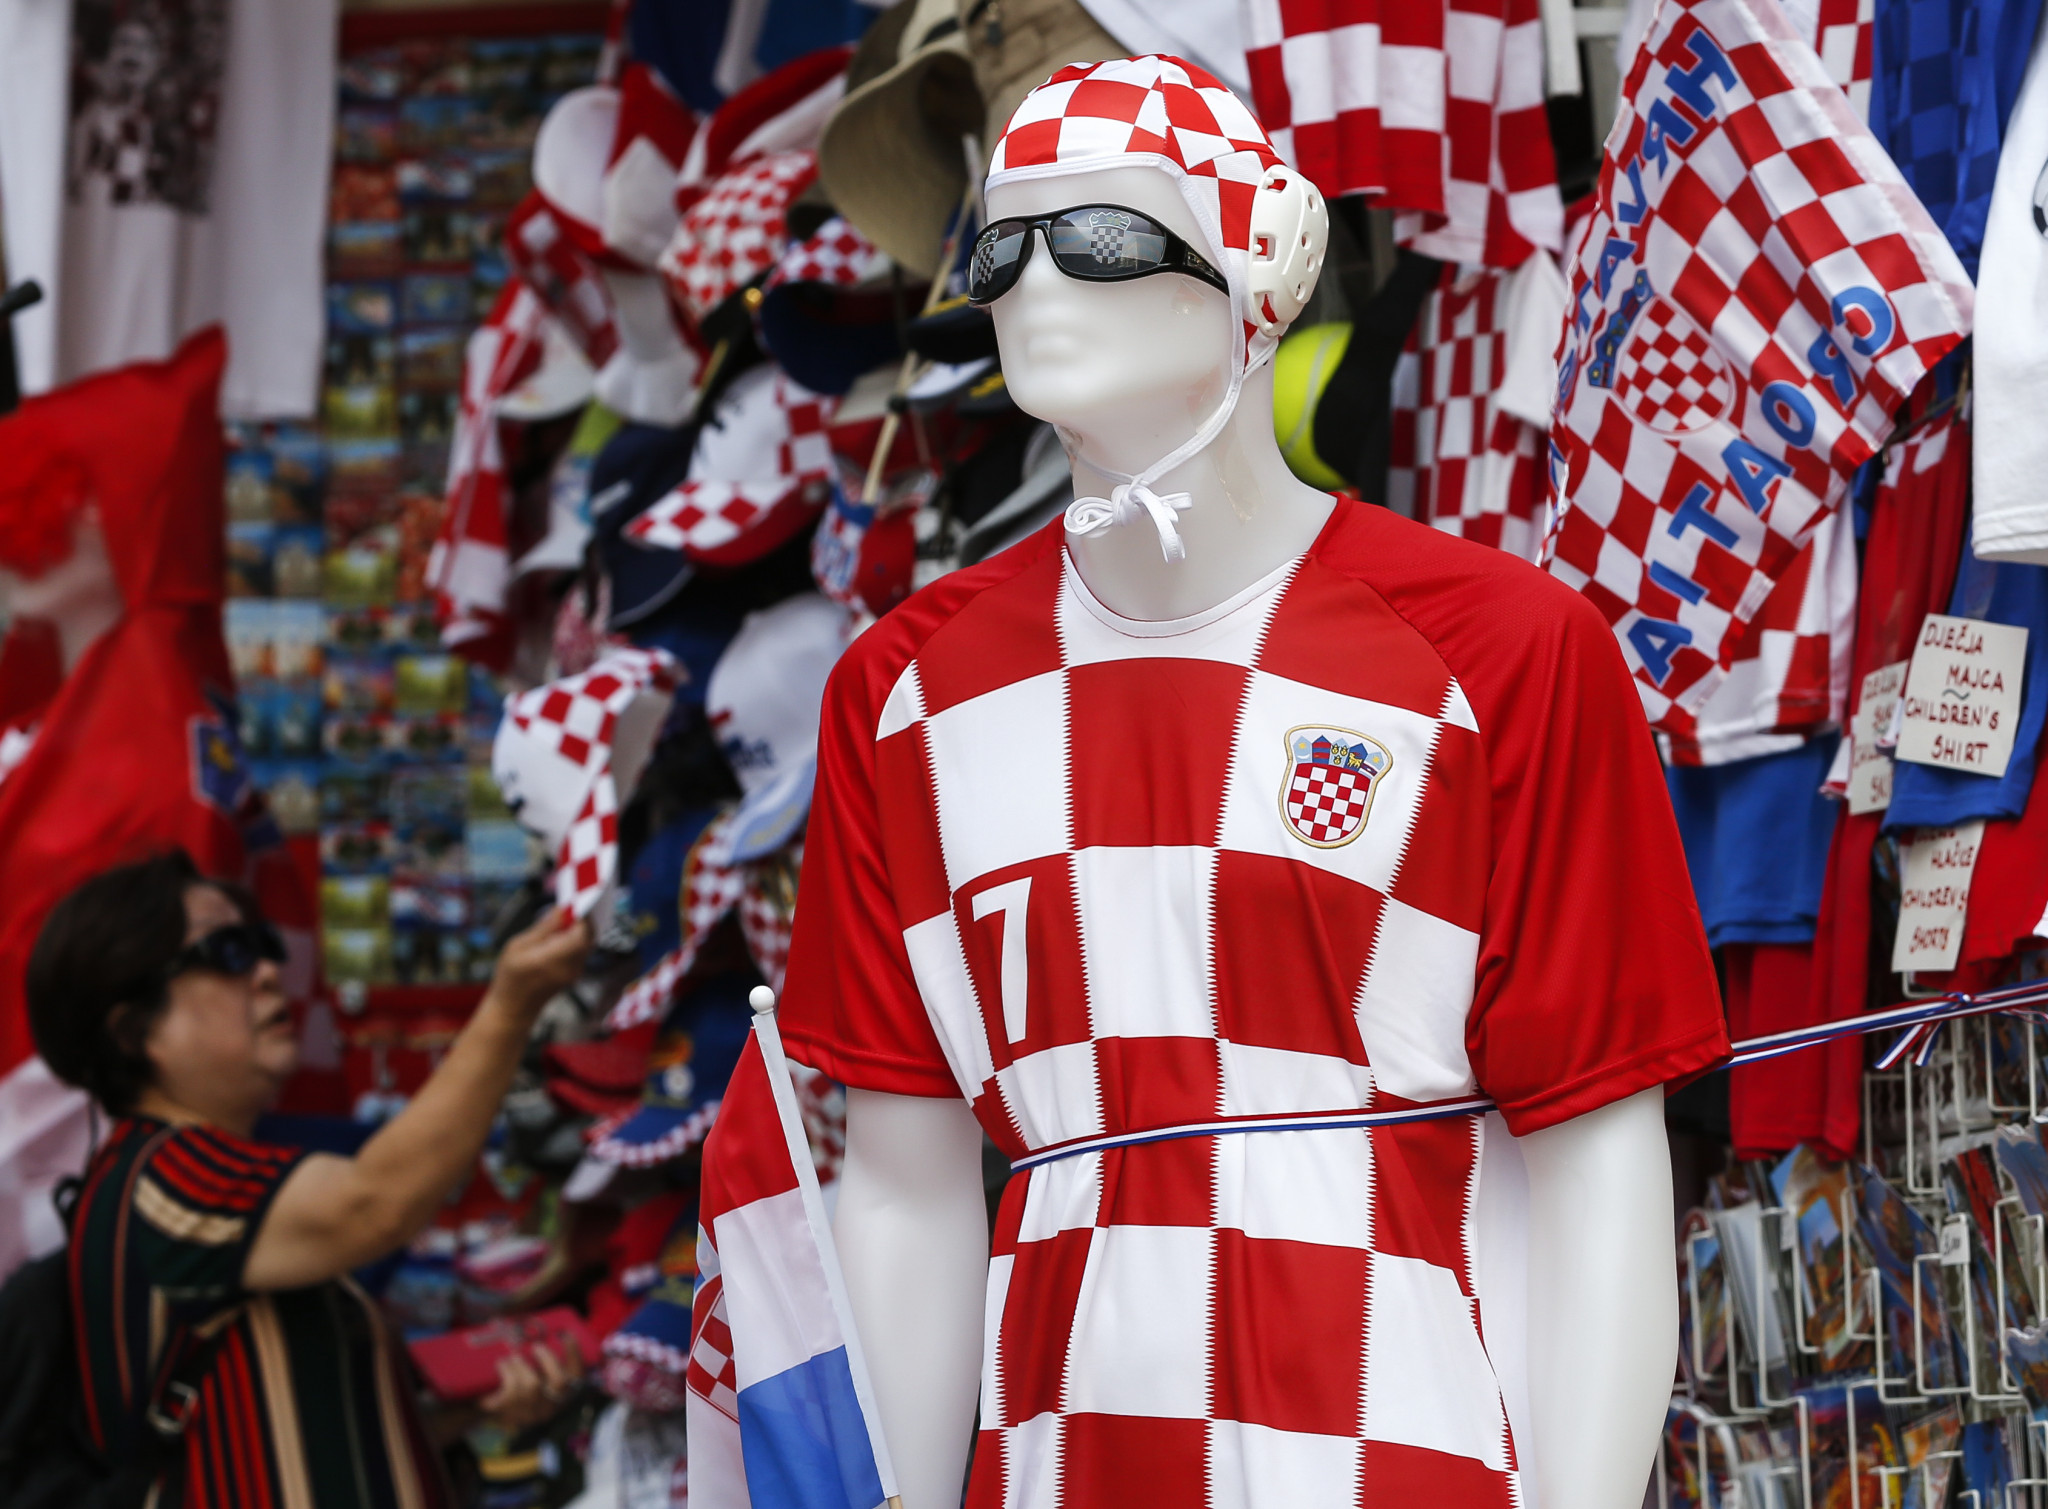 Croatia will aim for a maiden World Cup triumph when the two teams meet in Moscow ©Getty Images